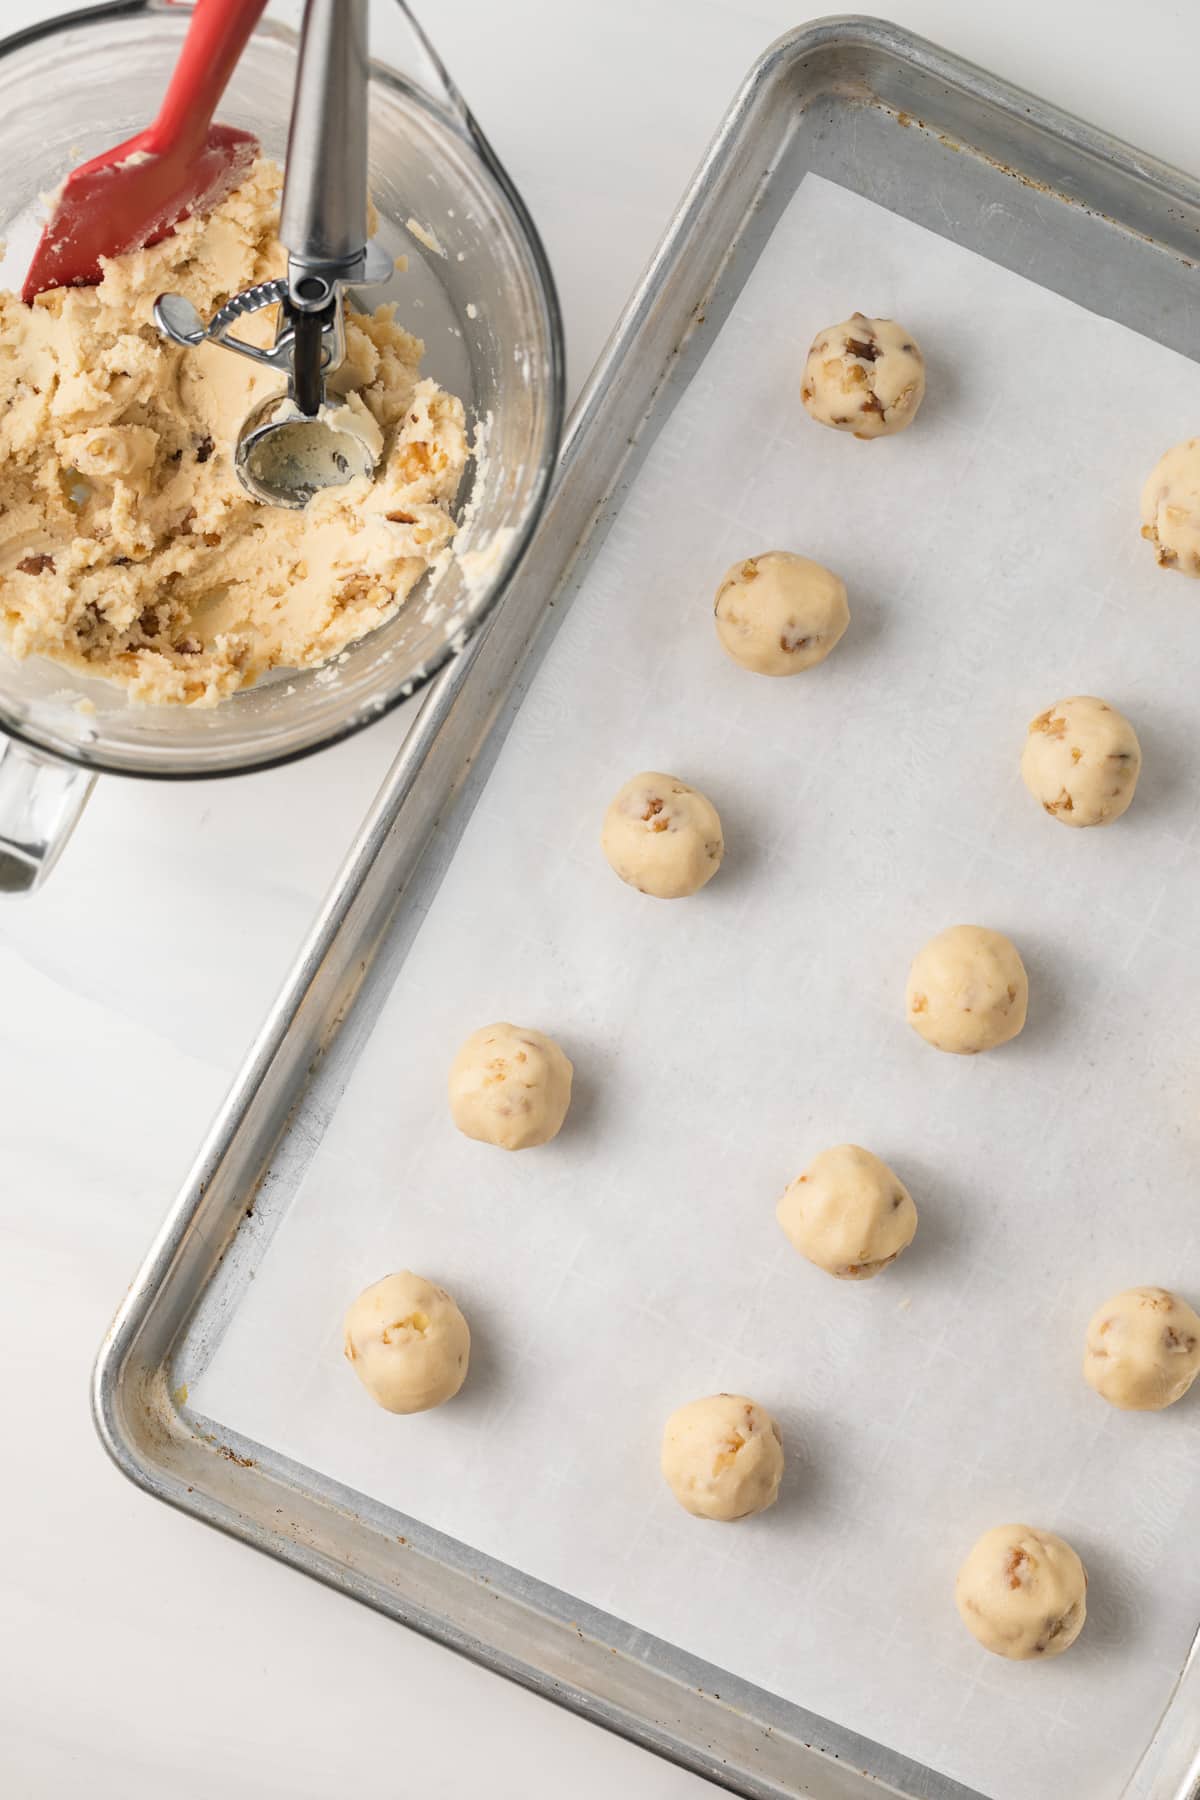 Rolled cookie dough on baking sheet.